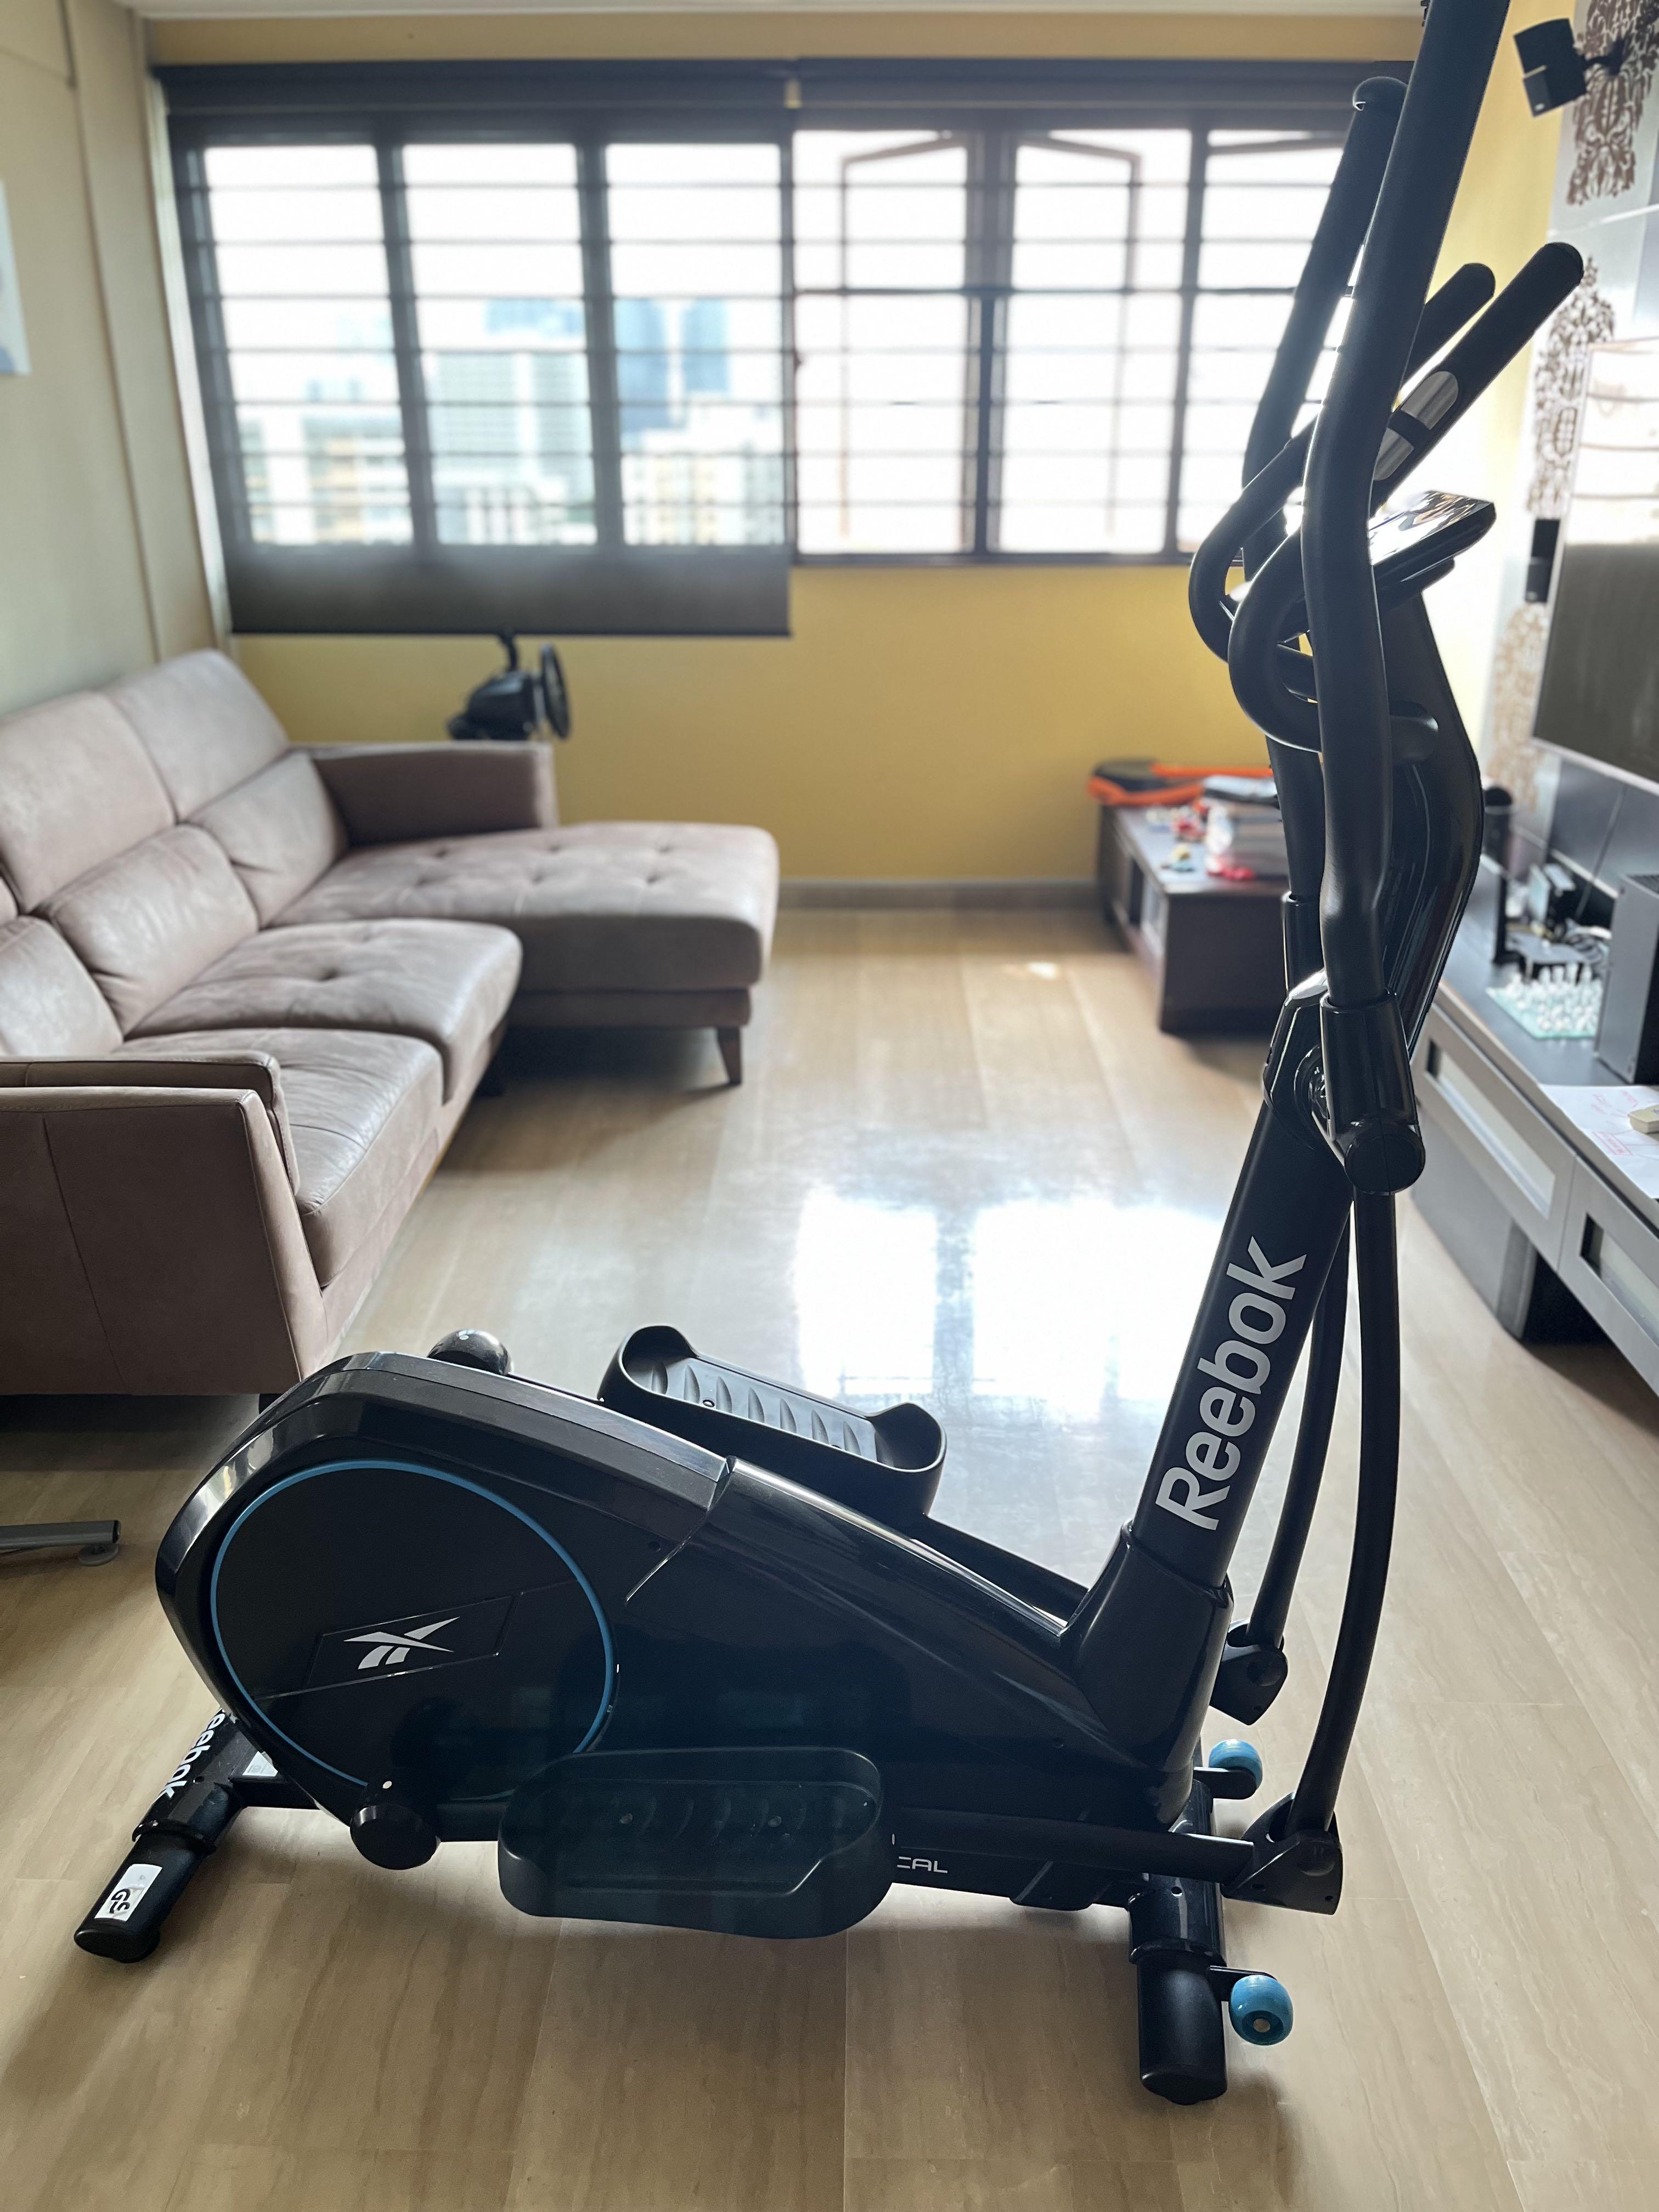 Reebok ZR10 Cross Trainer Elliptical, Sports Equipment, Exercise & Fitness, Cardio & Machines on Carousell